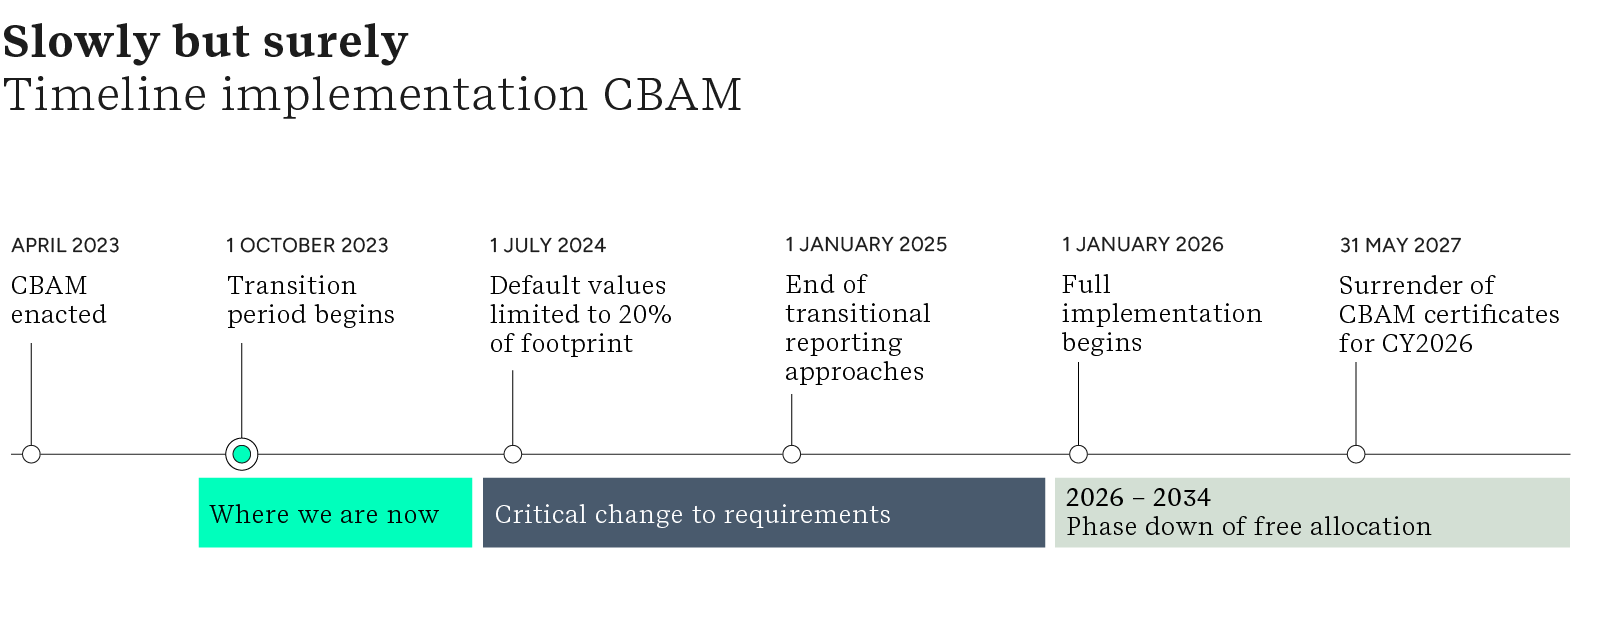 Slowly but surely - Timeline implementation CBAM